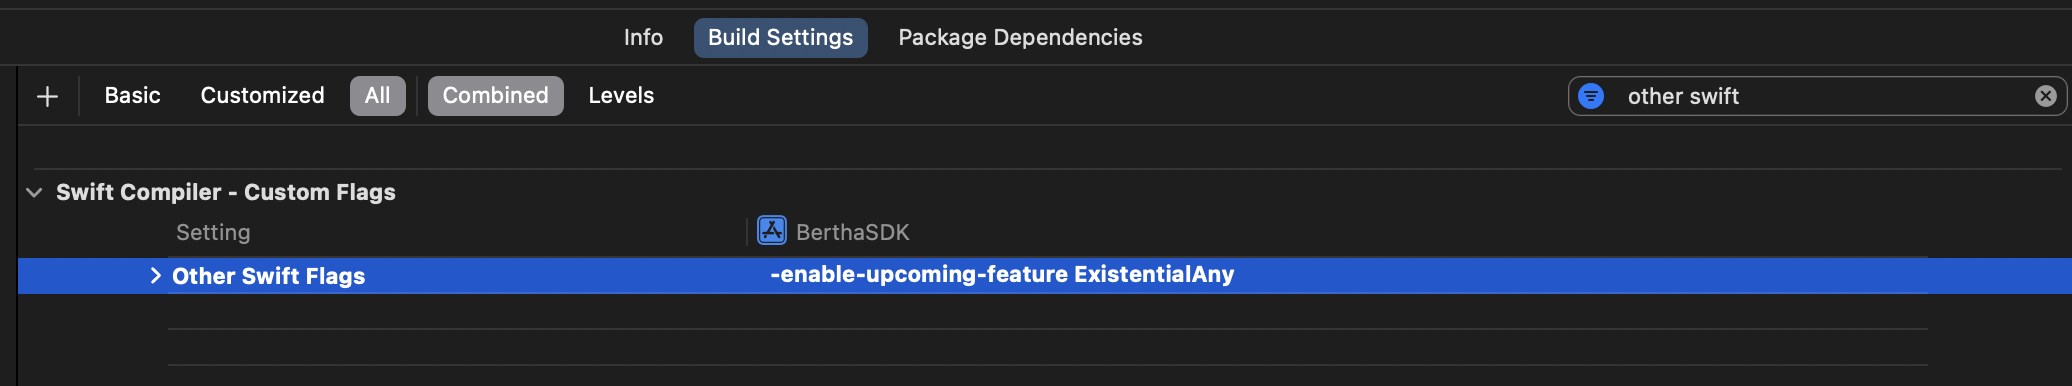 A screenshot showing the “Build Settings” tab in Xcode with the ‘-enable-upcoming-feature ExistentialAny’ added to the “Swift Compiler - Custom Flags” section.